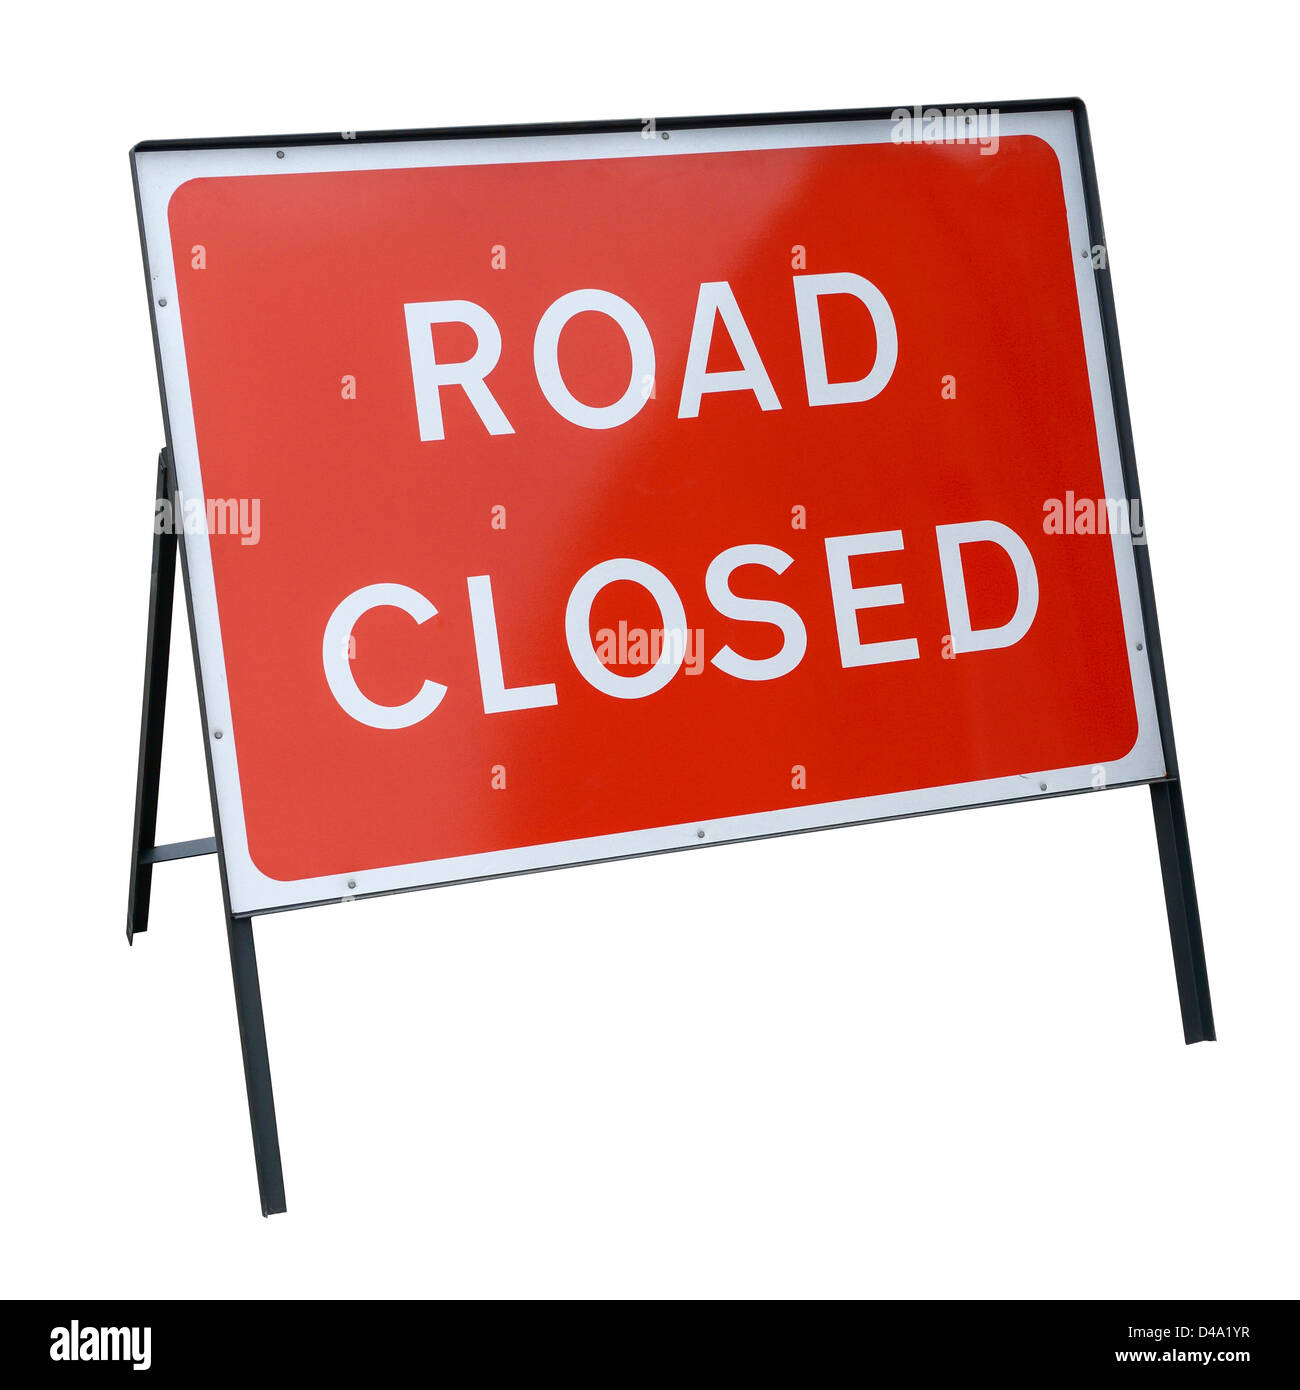 Road Closed sign Stock Photo